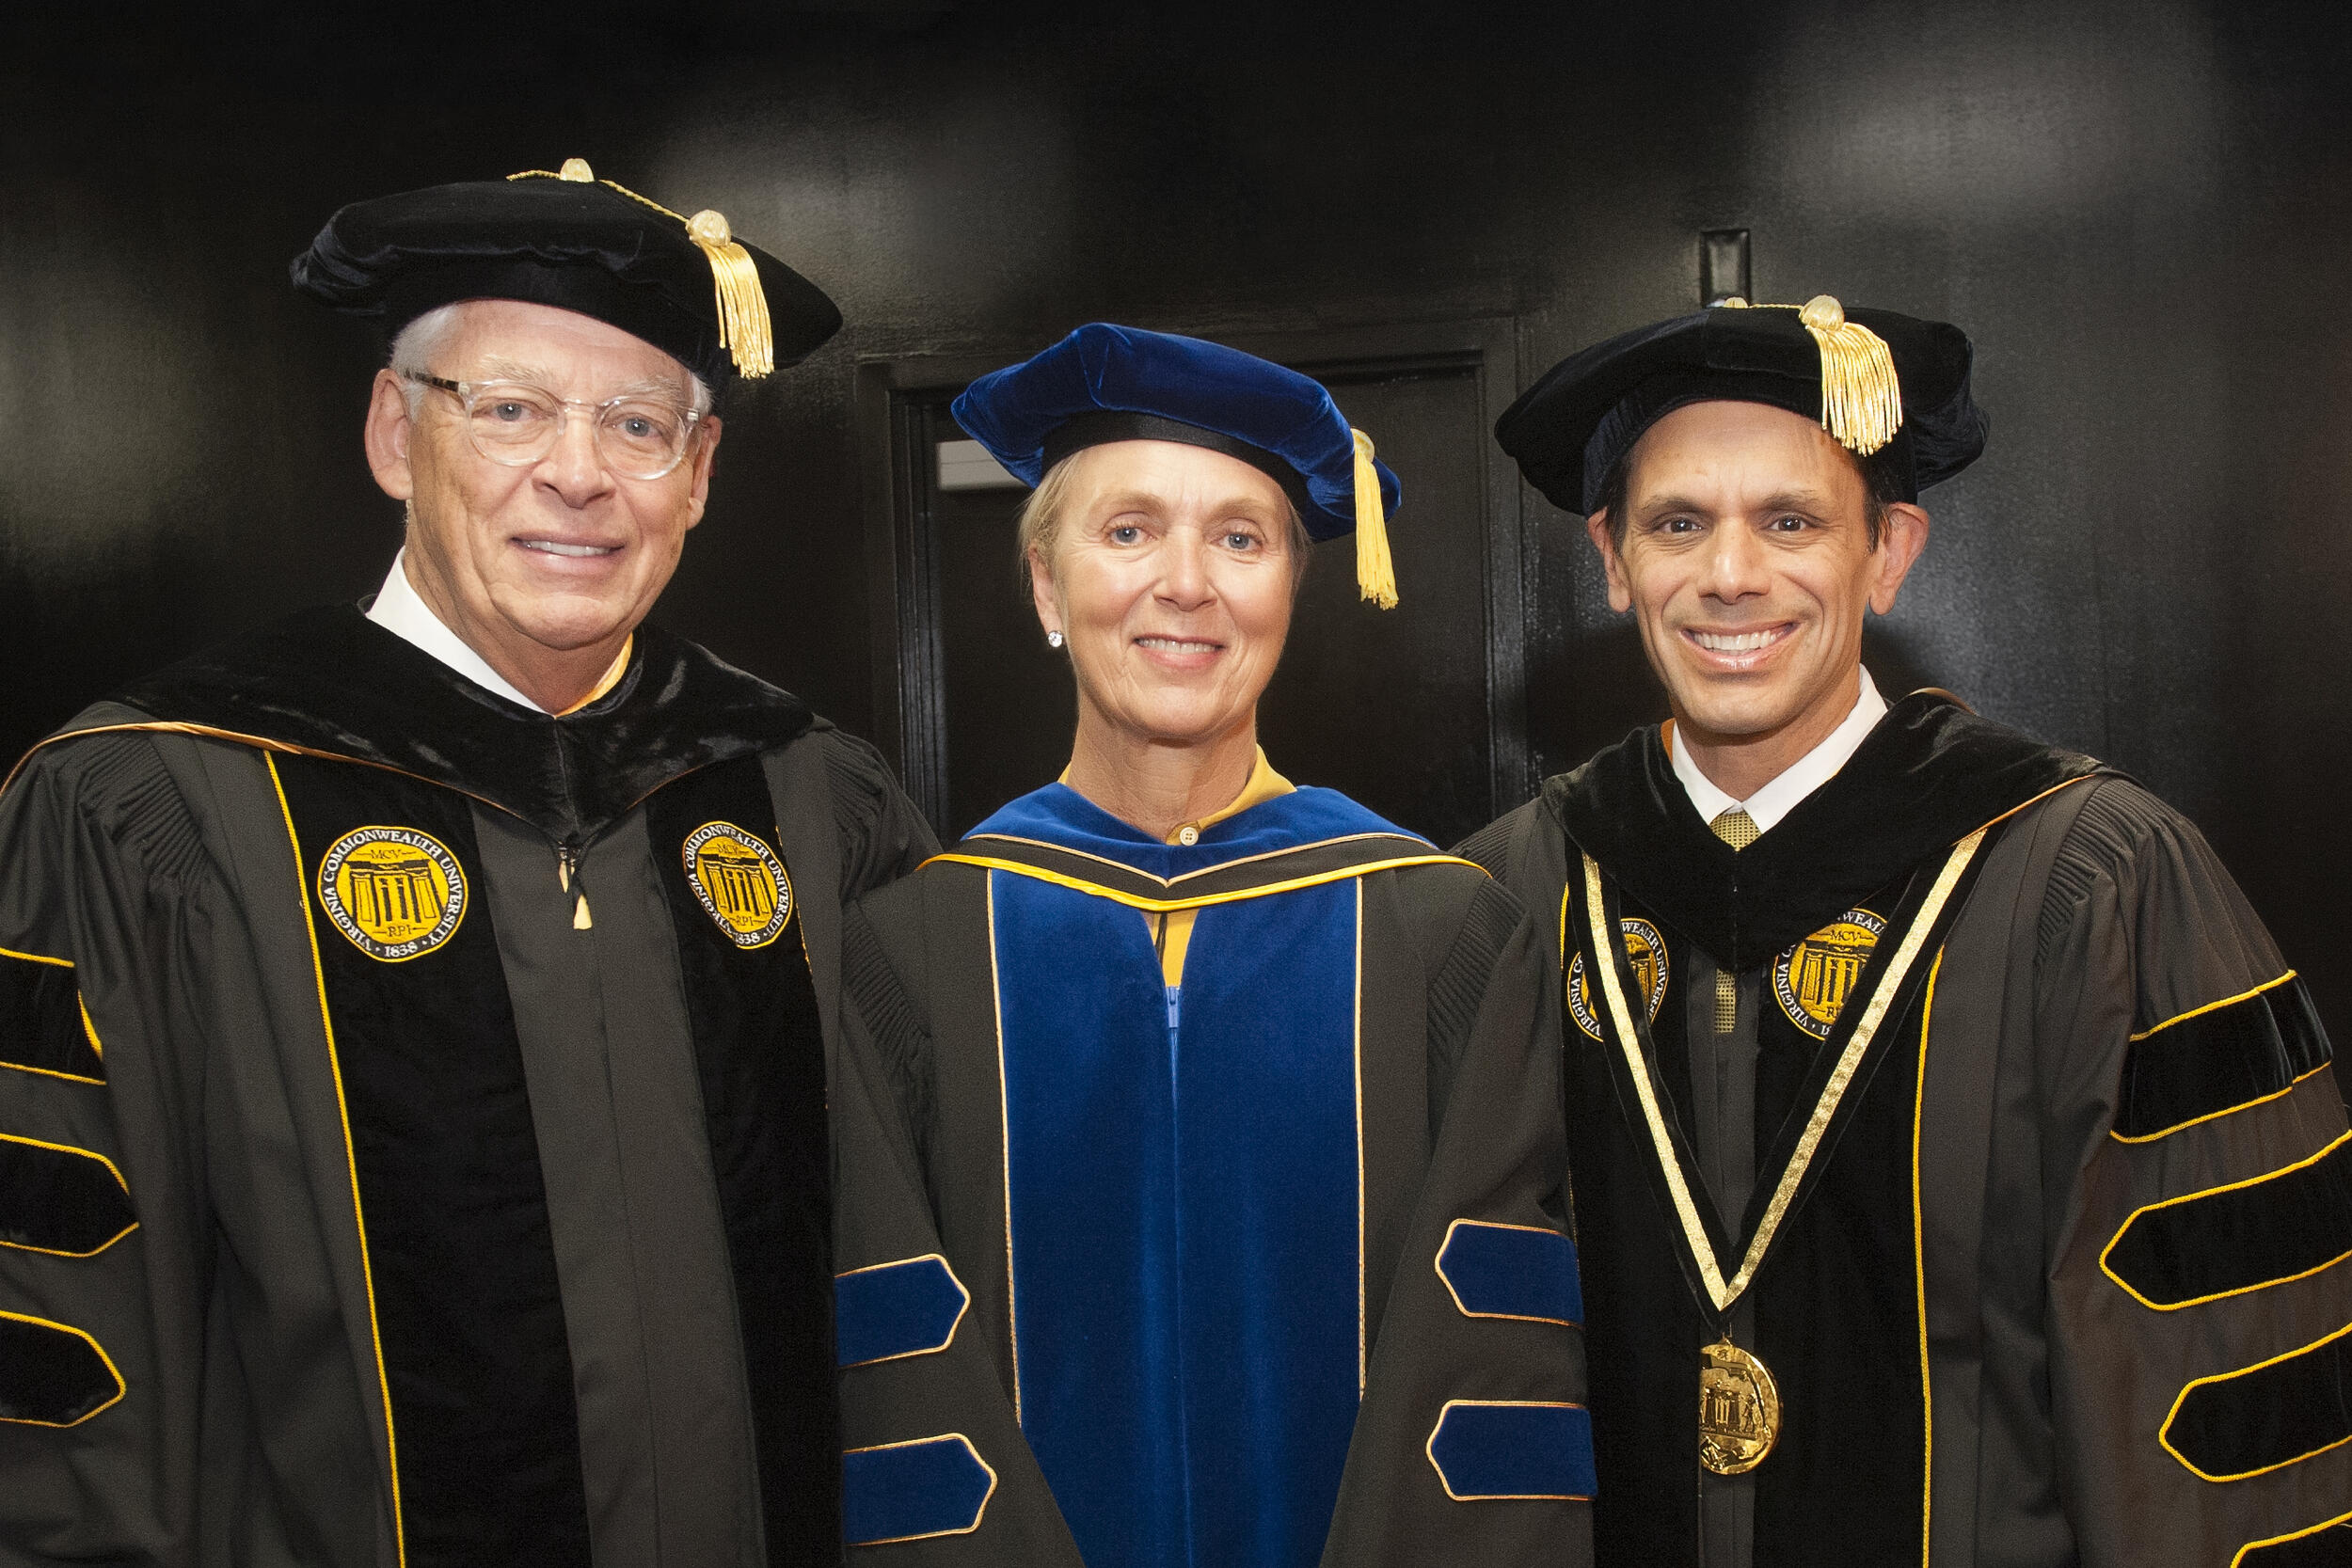 Bill Royall, left, with Pam Royall and VCU President Michael Rao at VCU's May 2017 commencement ceremony